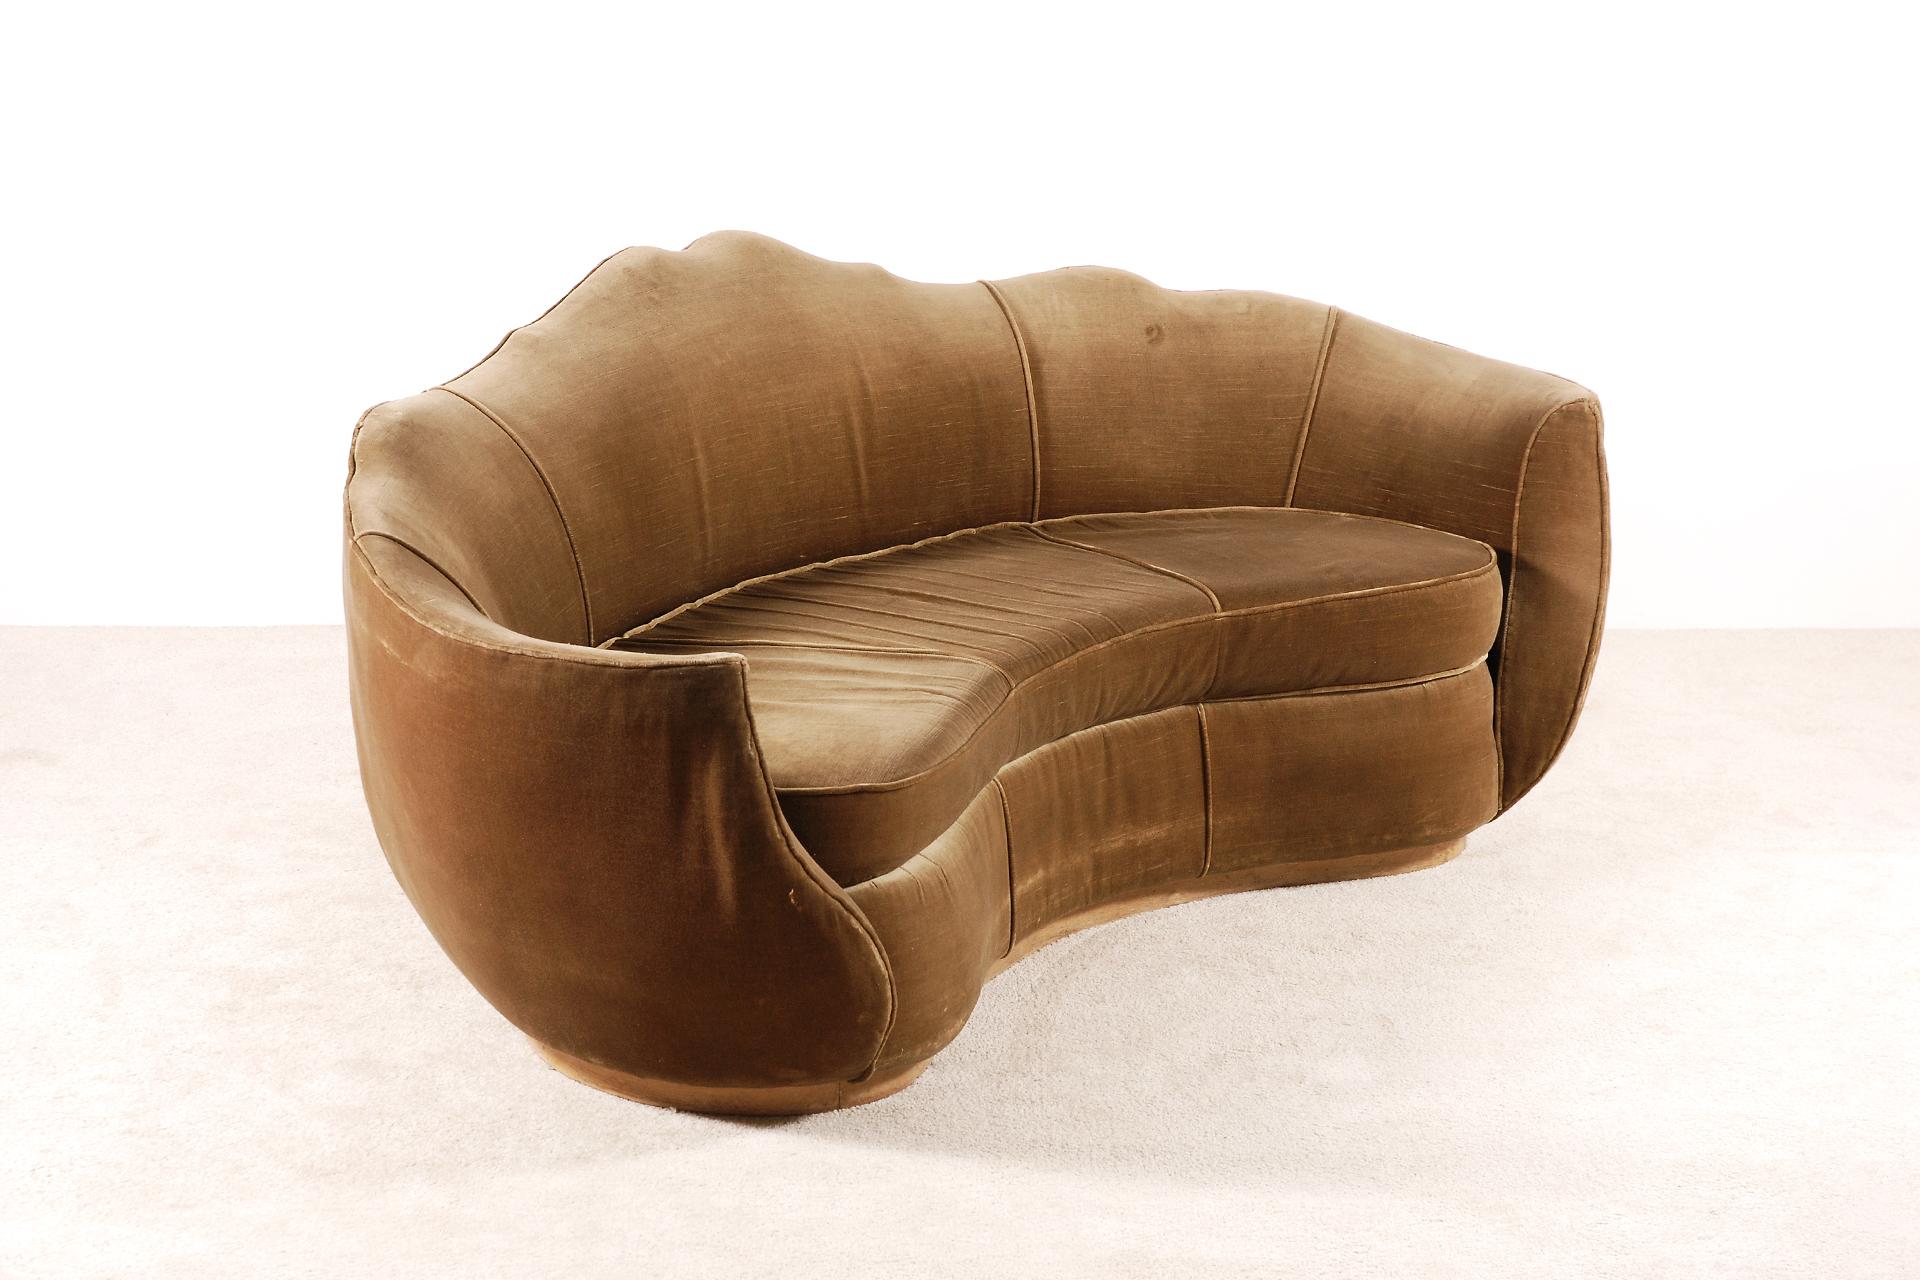 Here is a very elegant three-seat curved Art Deco sofa with generous carved lines and voluptuous curves, typical from the French Art Deco period. Massive curved Beech wood base, France, 1930s.

The original green/brown velvet upholstery is aged